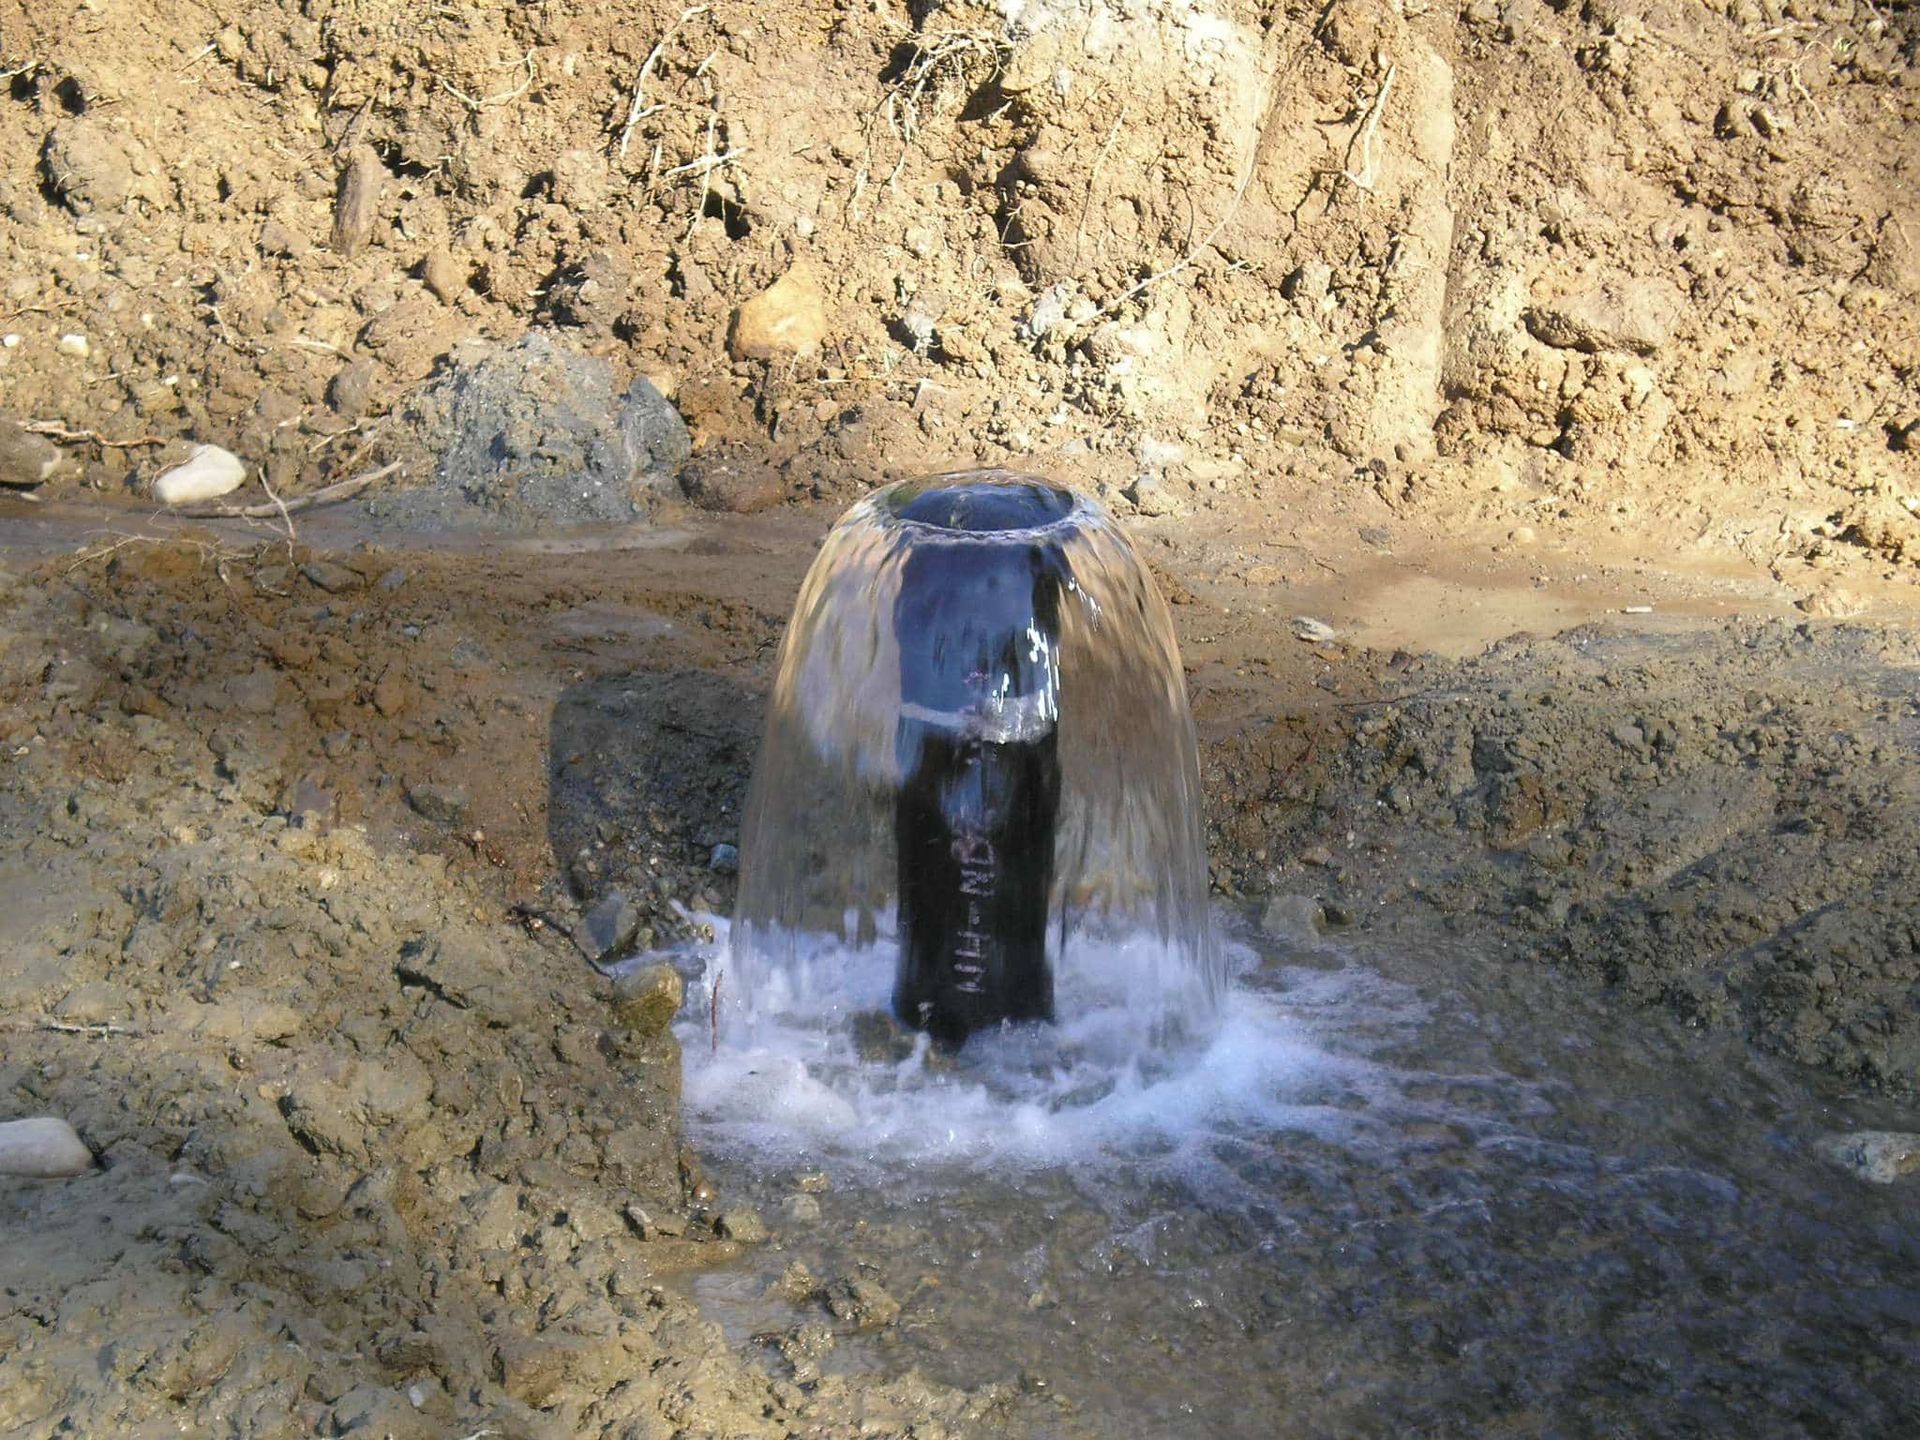 Water is coming out of a hole in the ground